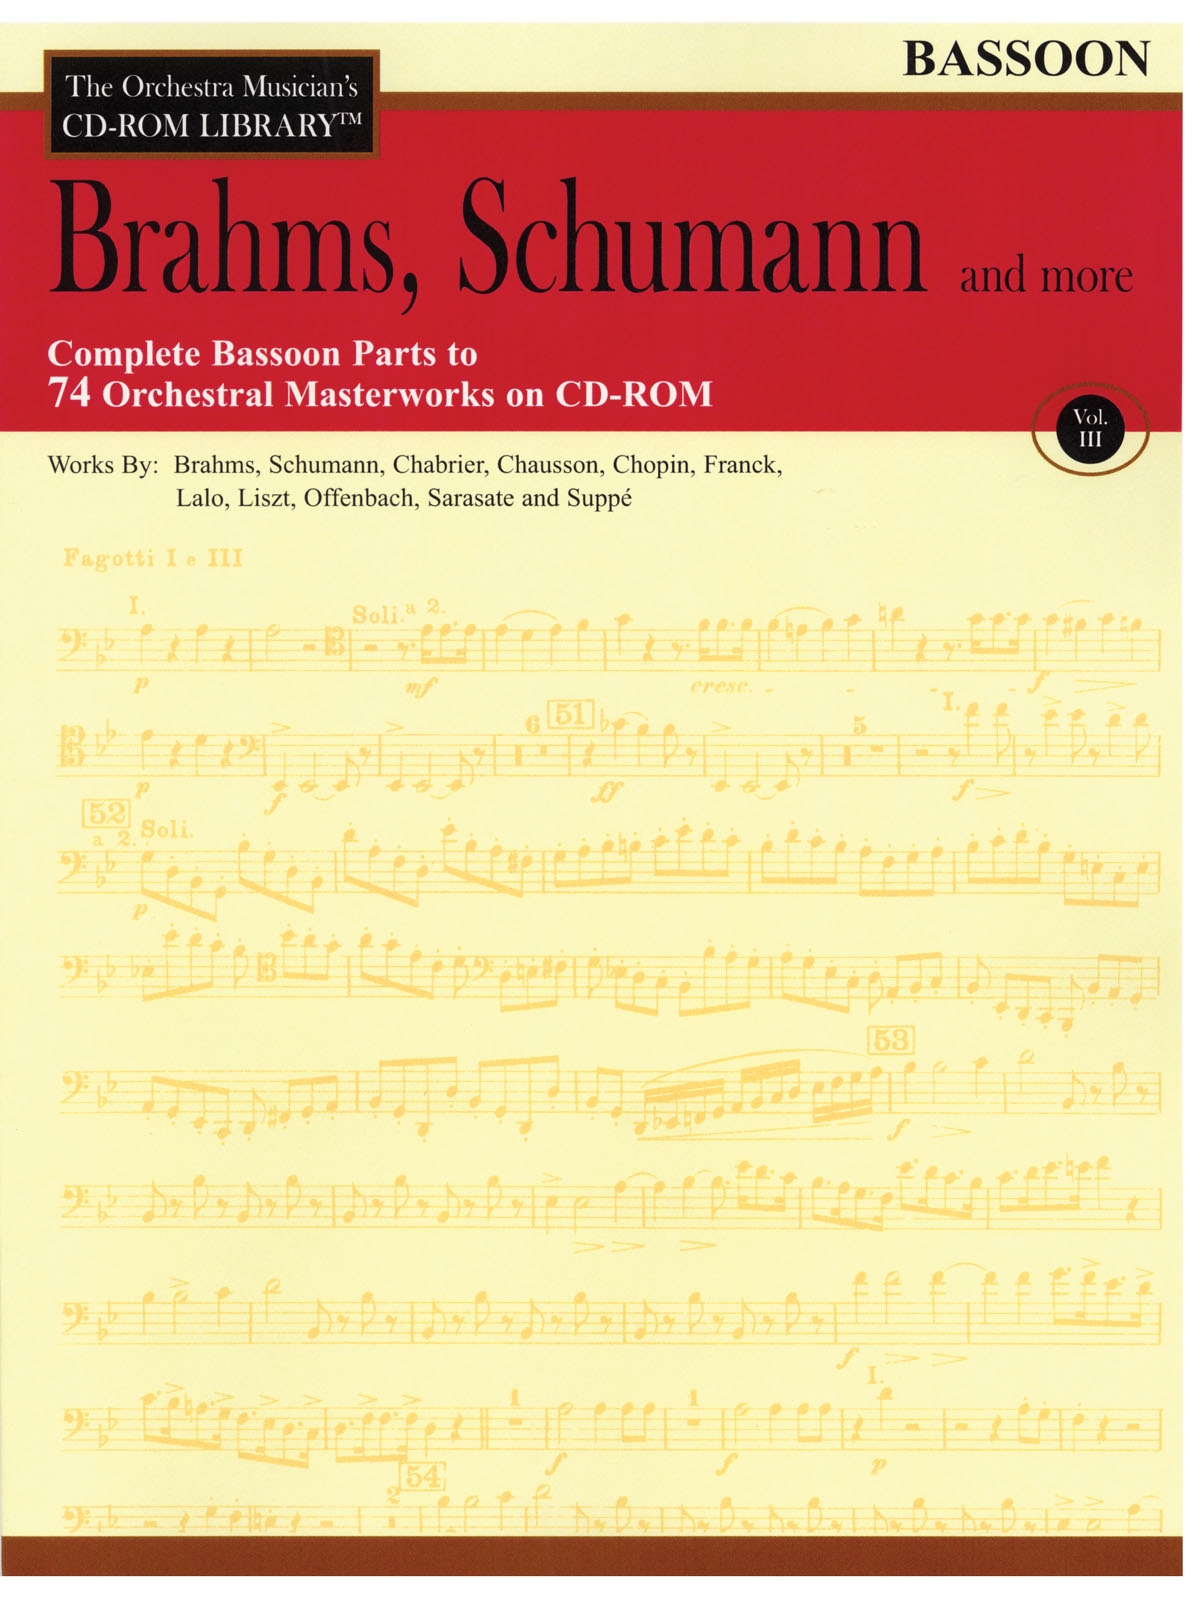 Brahms, Schumann & More - Volume 3 - The Orchestra Musician's CD-ROM Library - Bassoon - fagot noty